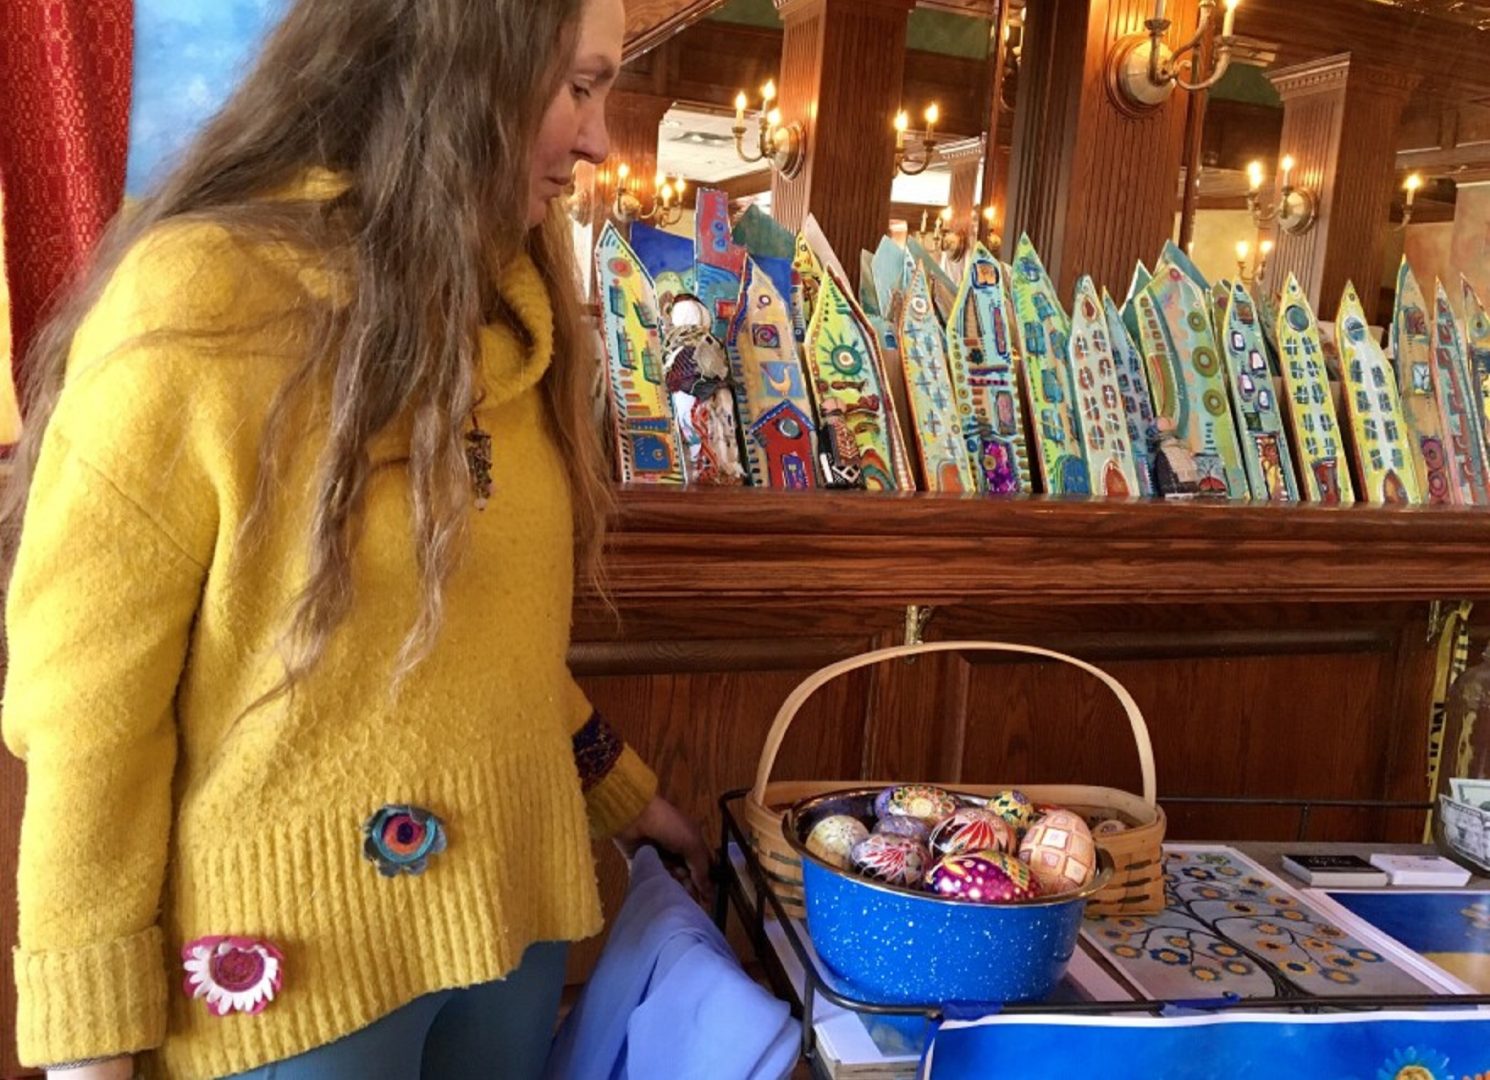 Olga Snyder, an artist who is originally from Ukraine, explained the story of Pysanky or Ukrainian Easter eggs. She and her husband, John, of Coudersport, Pennsylvania, have been raising money to support Ukrainians impacted by Russia's invasion.